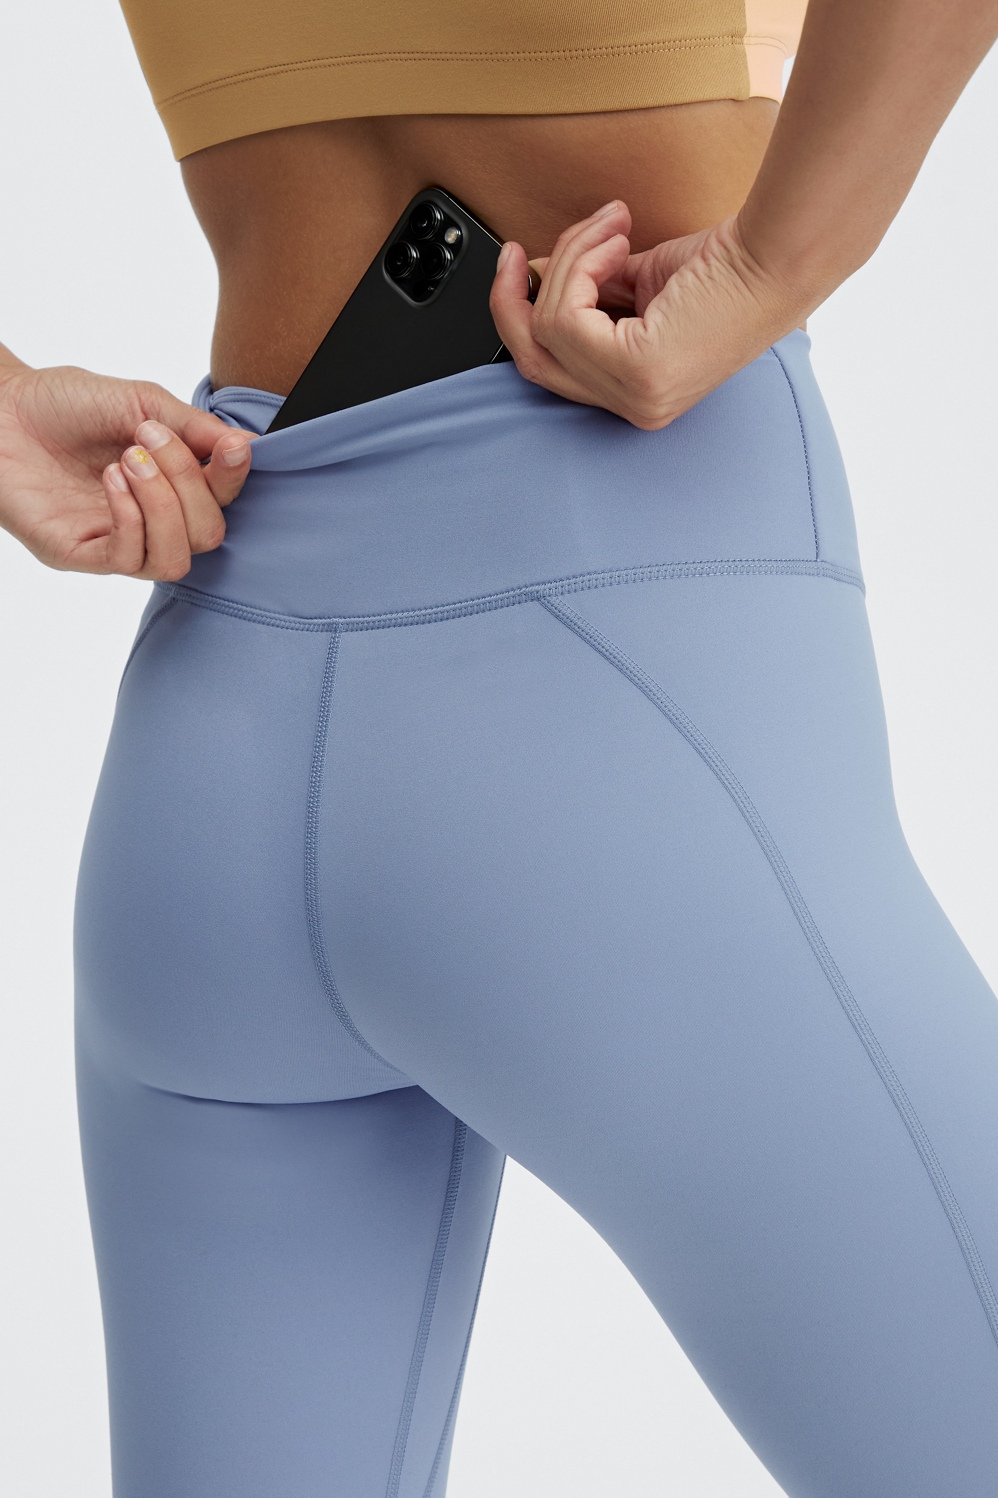 Exotic Women Fabletics Leggings With Hidden Zipper Perfect For Outdoor  Activities And Delayed Wear Large Size Available From Xiaobaica, $32.53